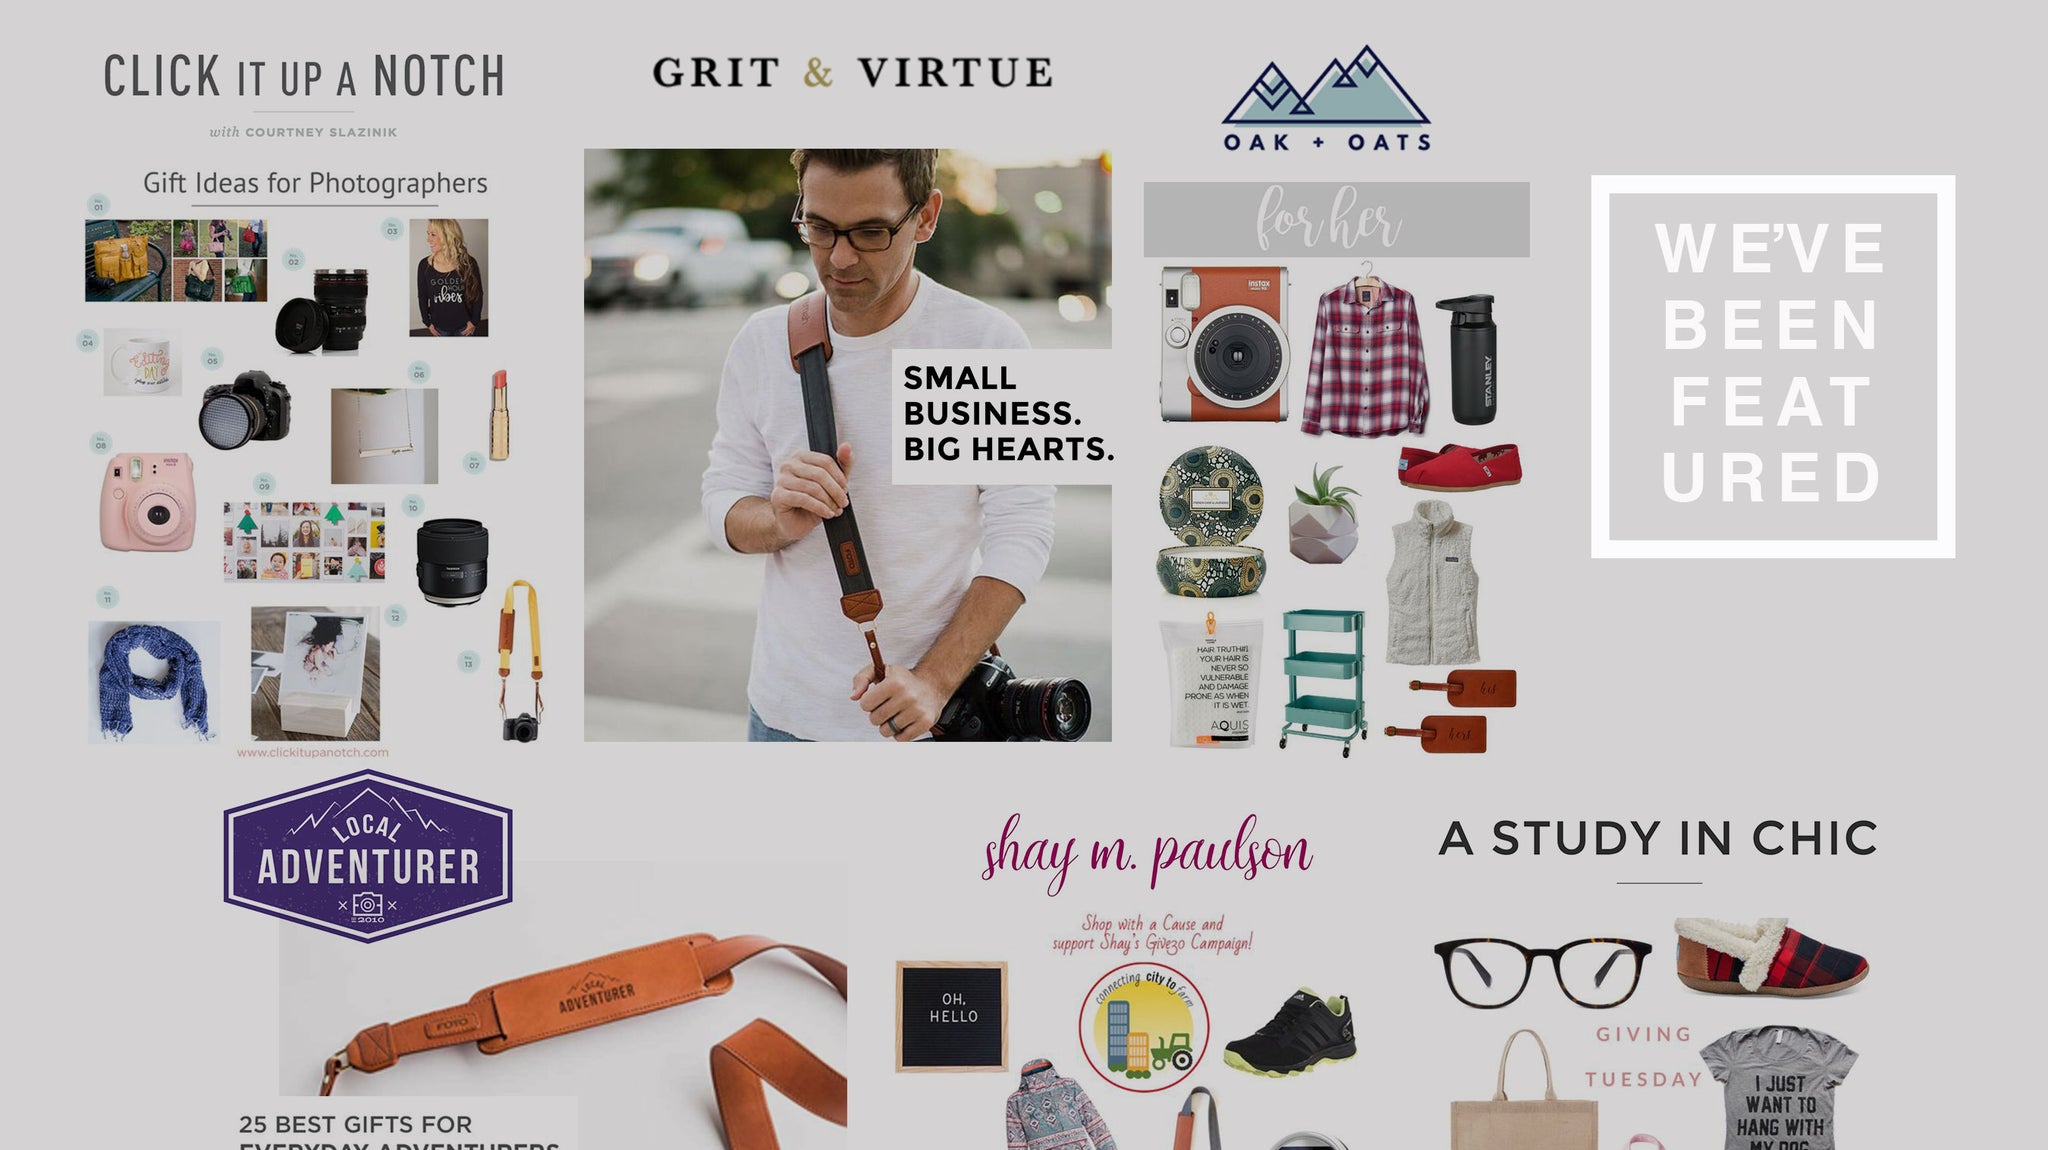 We've Been Featured! A Collection of Holiday Gift Guides